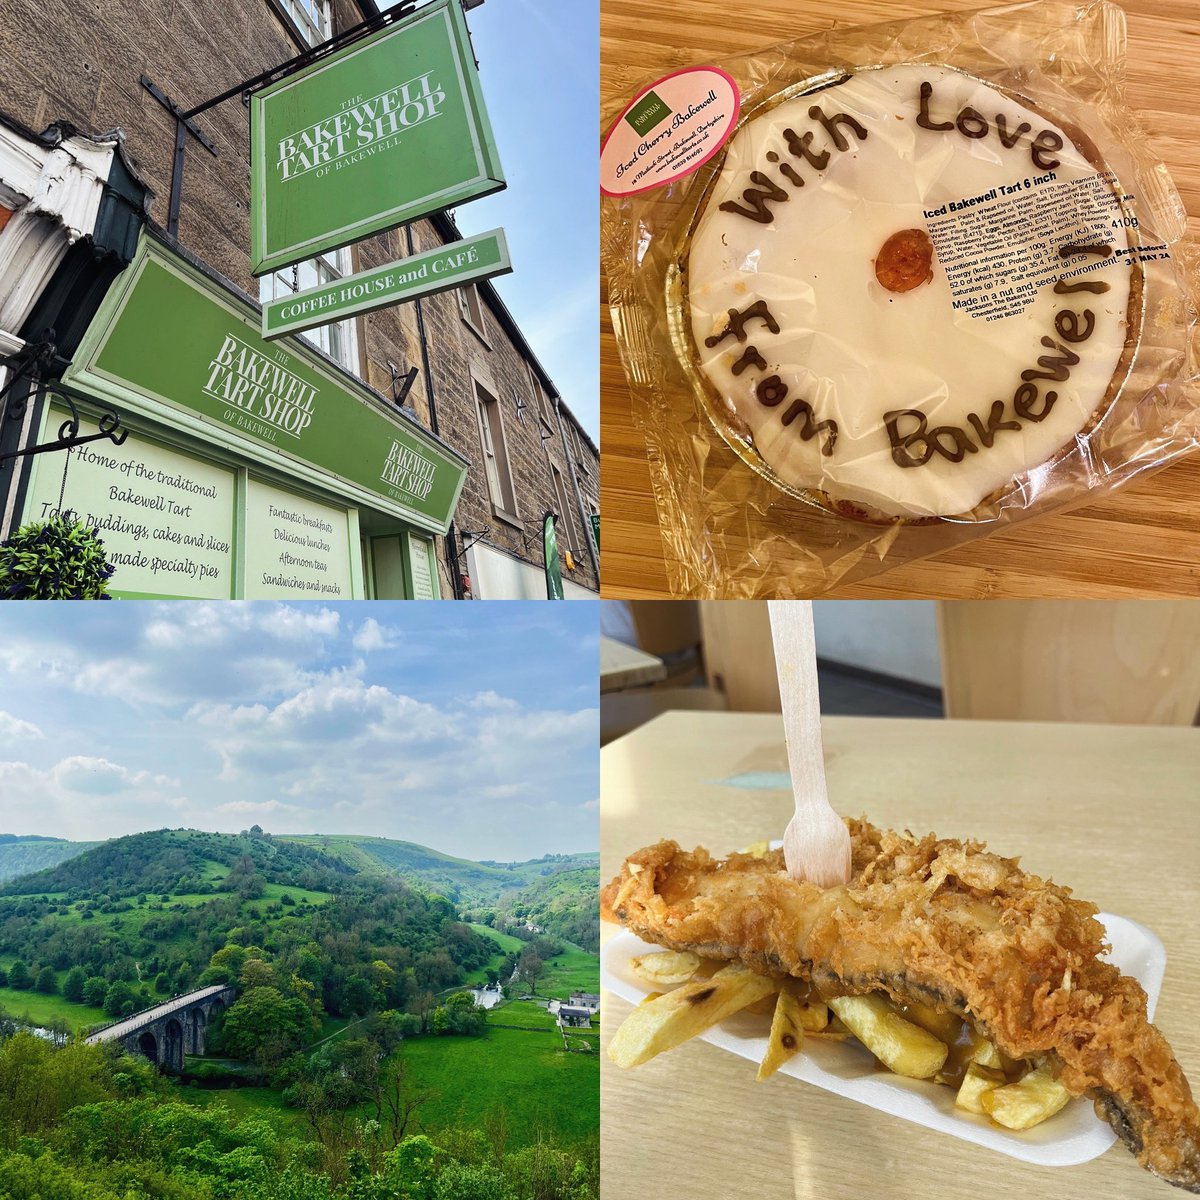 Adventures, day tripping and exploring the weekend away 😍

From Buxton to Monsal Head. 
Matlock Bath for potentially the BEST Fish N Chips I’ve ever had to Bakewell, for the tarts and Sunday strolling round Cheshire. 

Perfection. ♥️